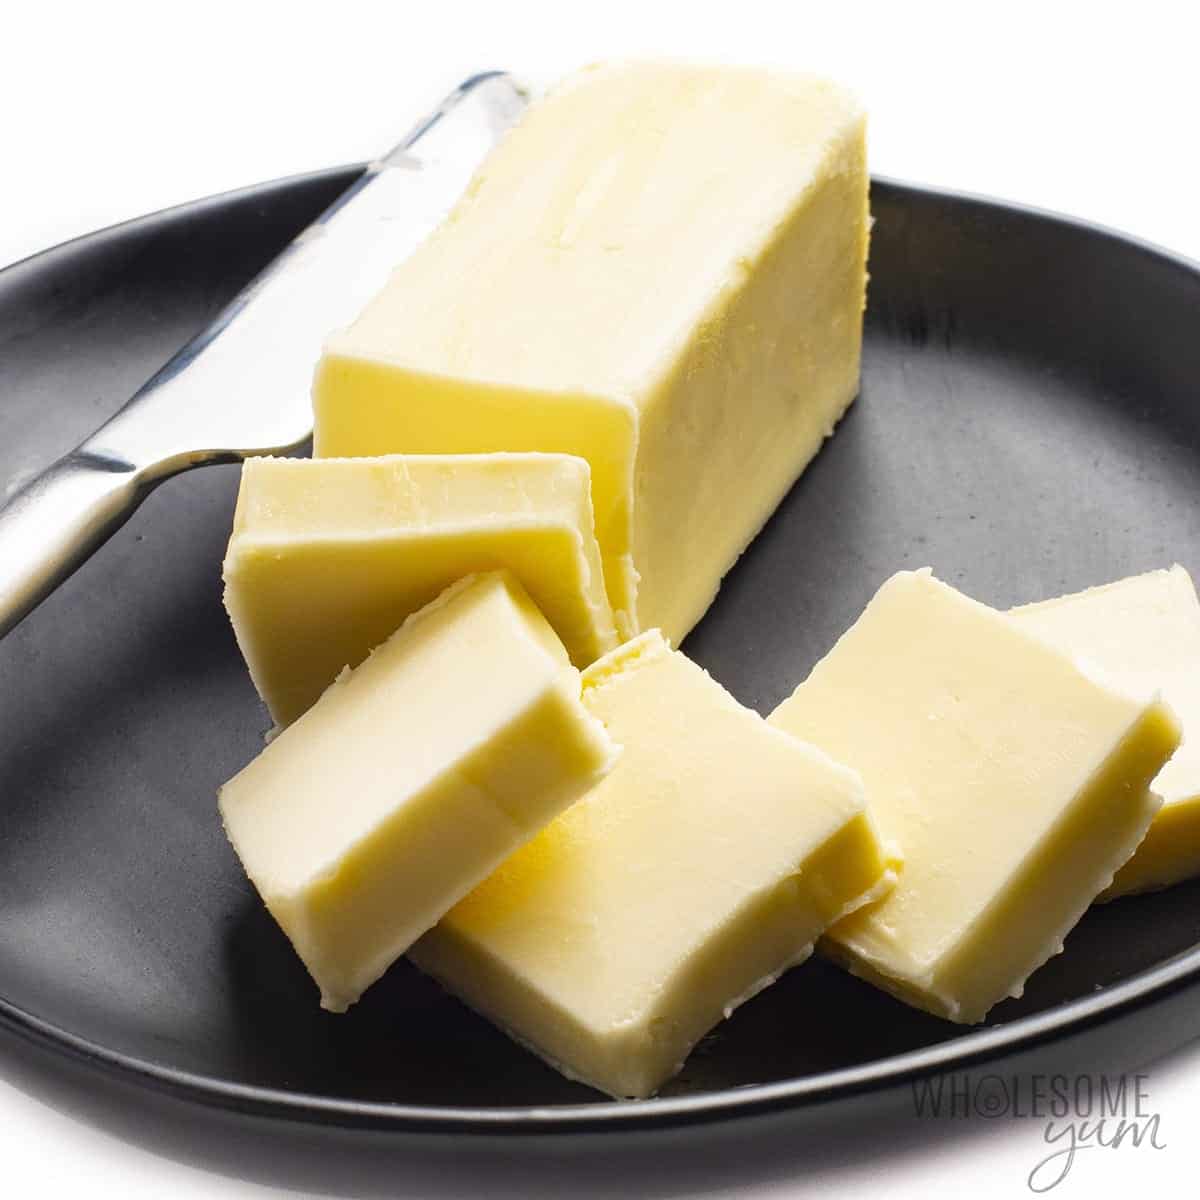 How high are carbs in butter? This fresh sliced butter is naturally low carb.